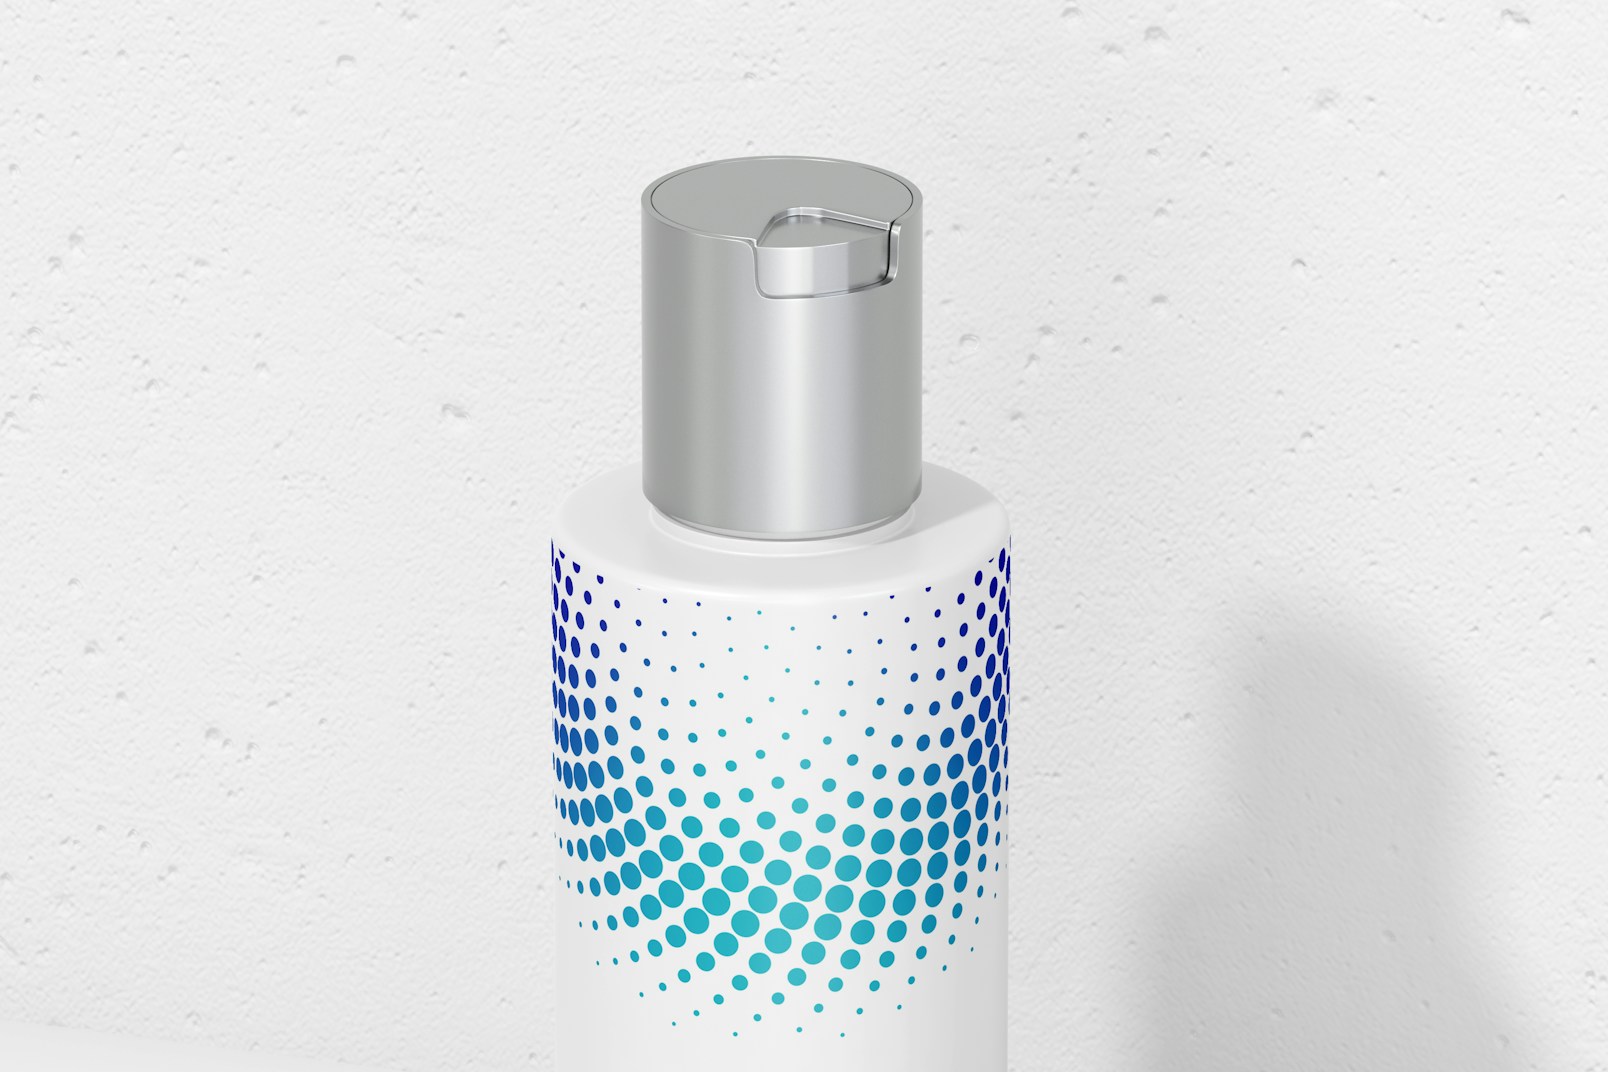 60ml PET Cylinder Bottle With Metal Cap Mockup, Front View